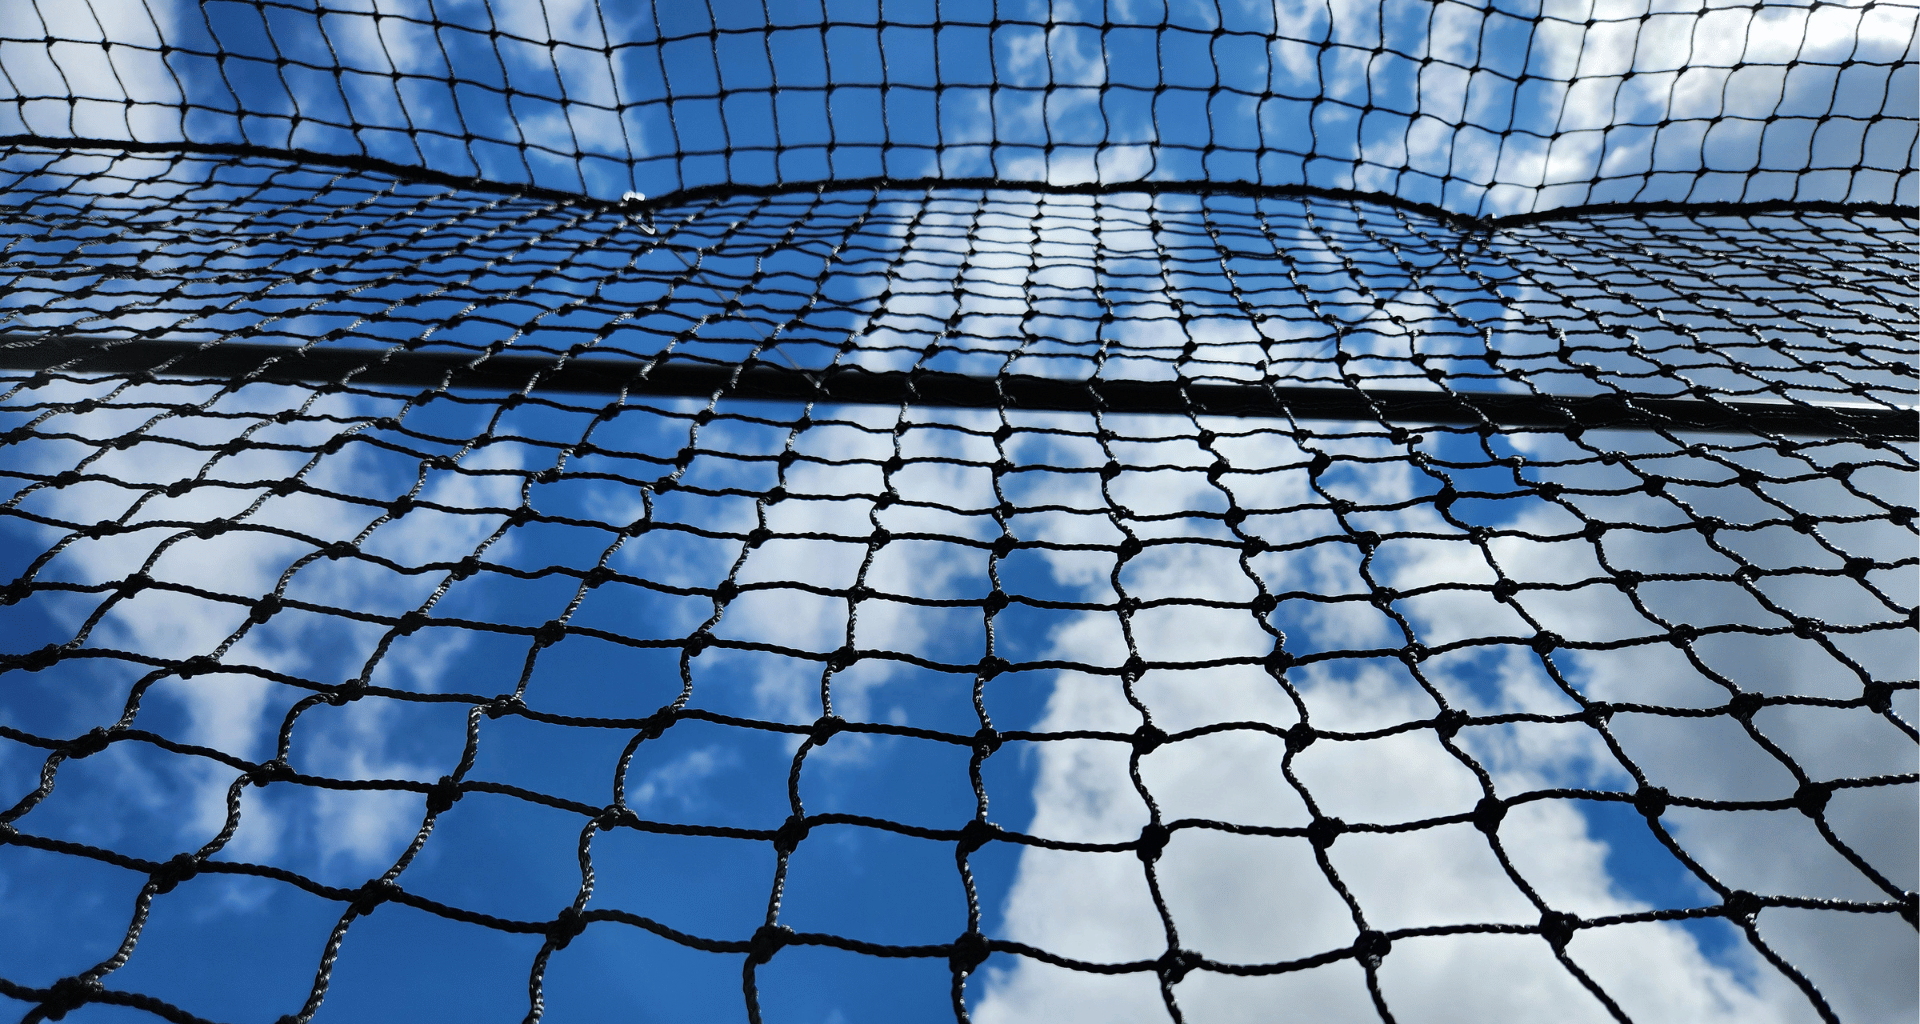 What Are the Key Differences Between Batting Cages and the Companies That Sell Them?